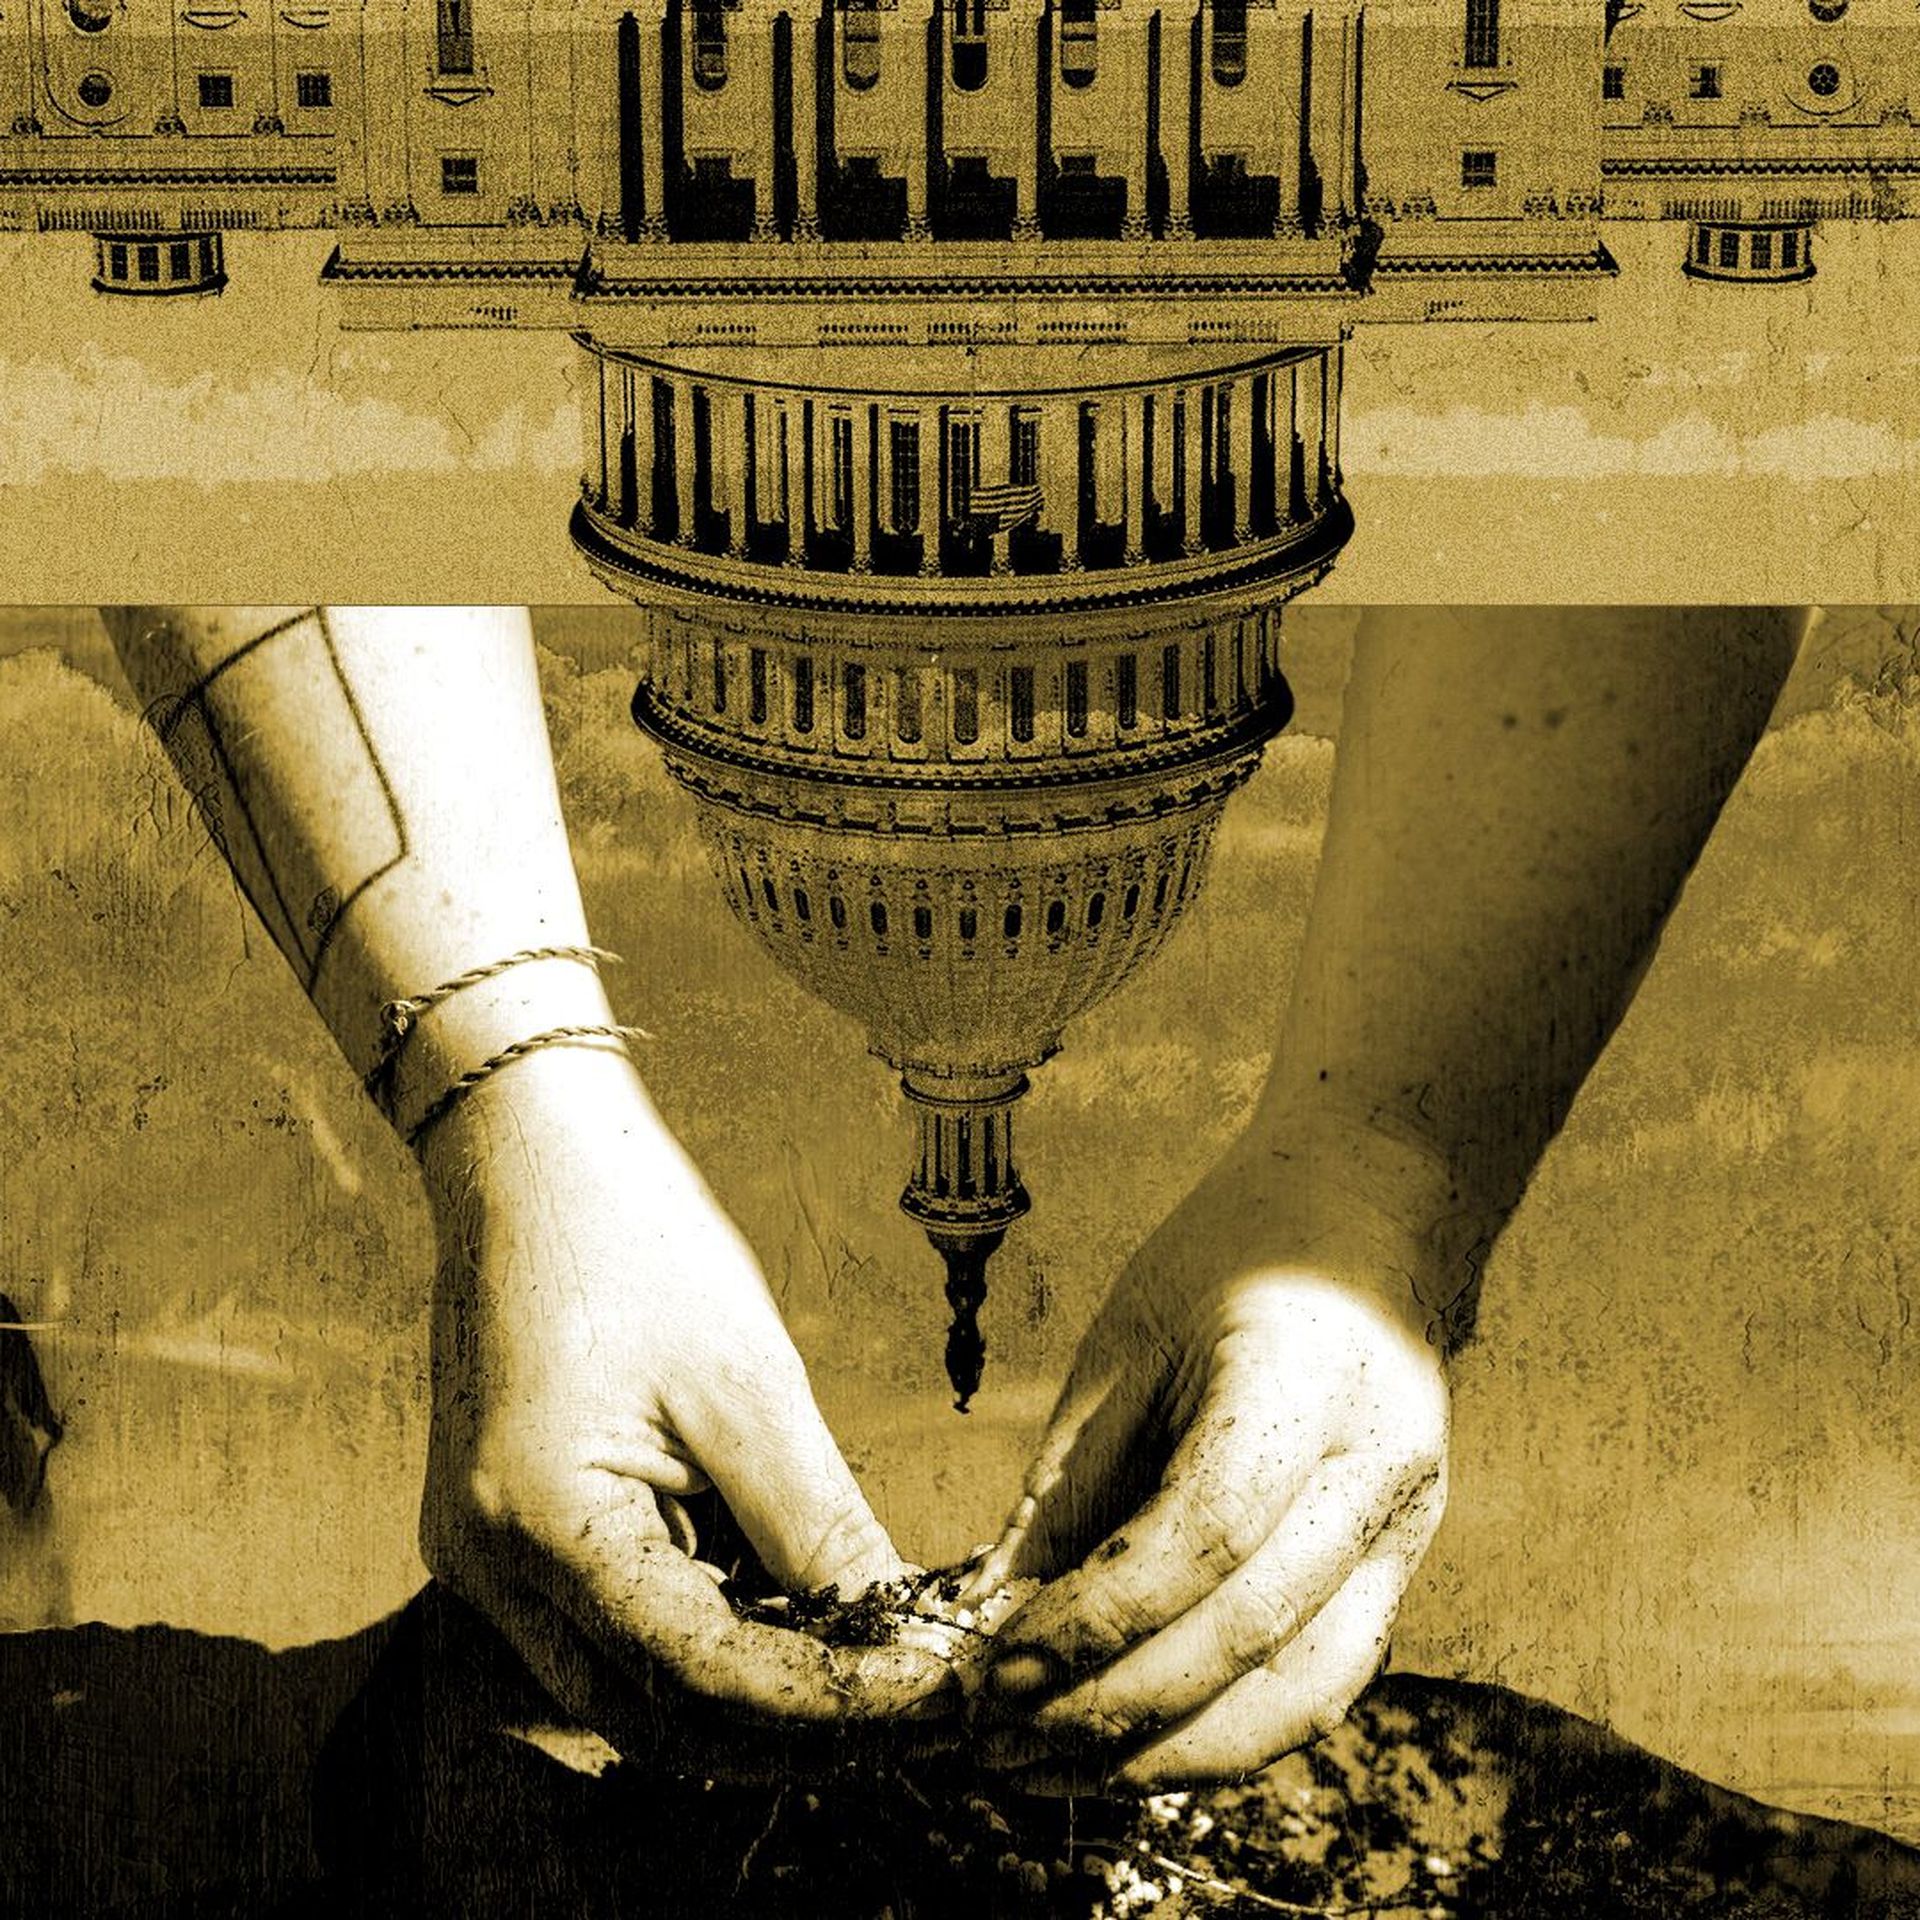 Photo illustration of silhouettes of Yurok fishermen, a member of the Haida/Tlingít nation harvesting traditional plants and the US Capitol building.